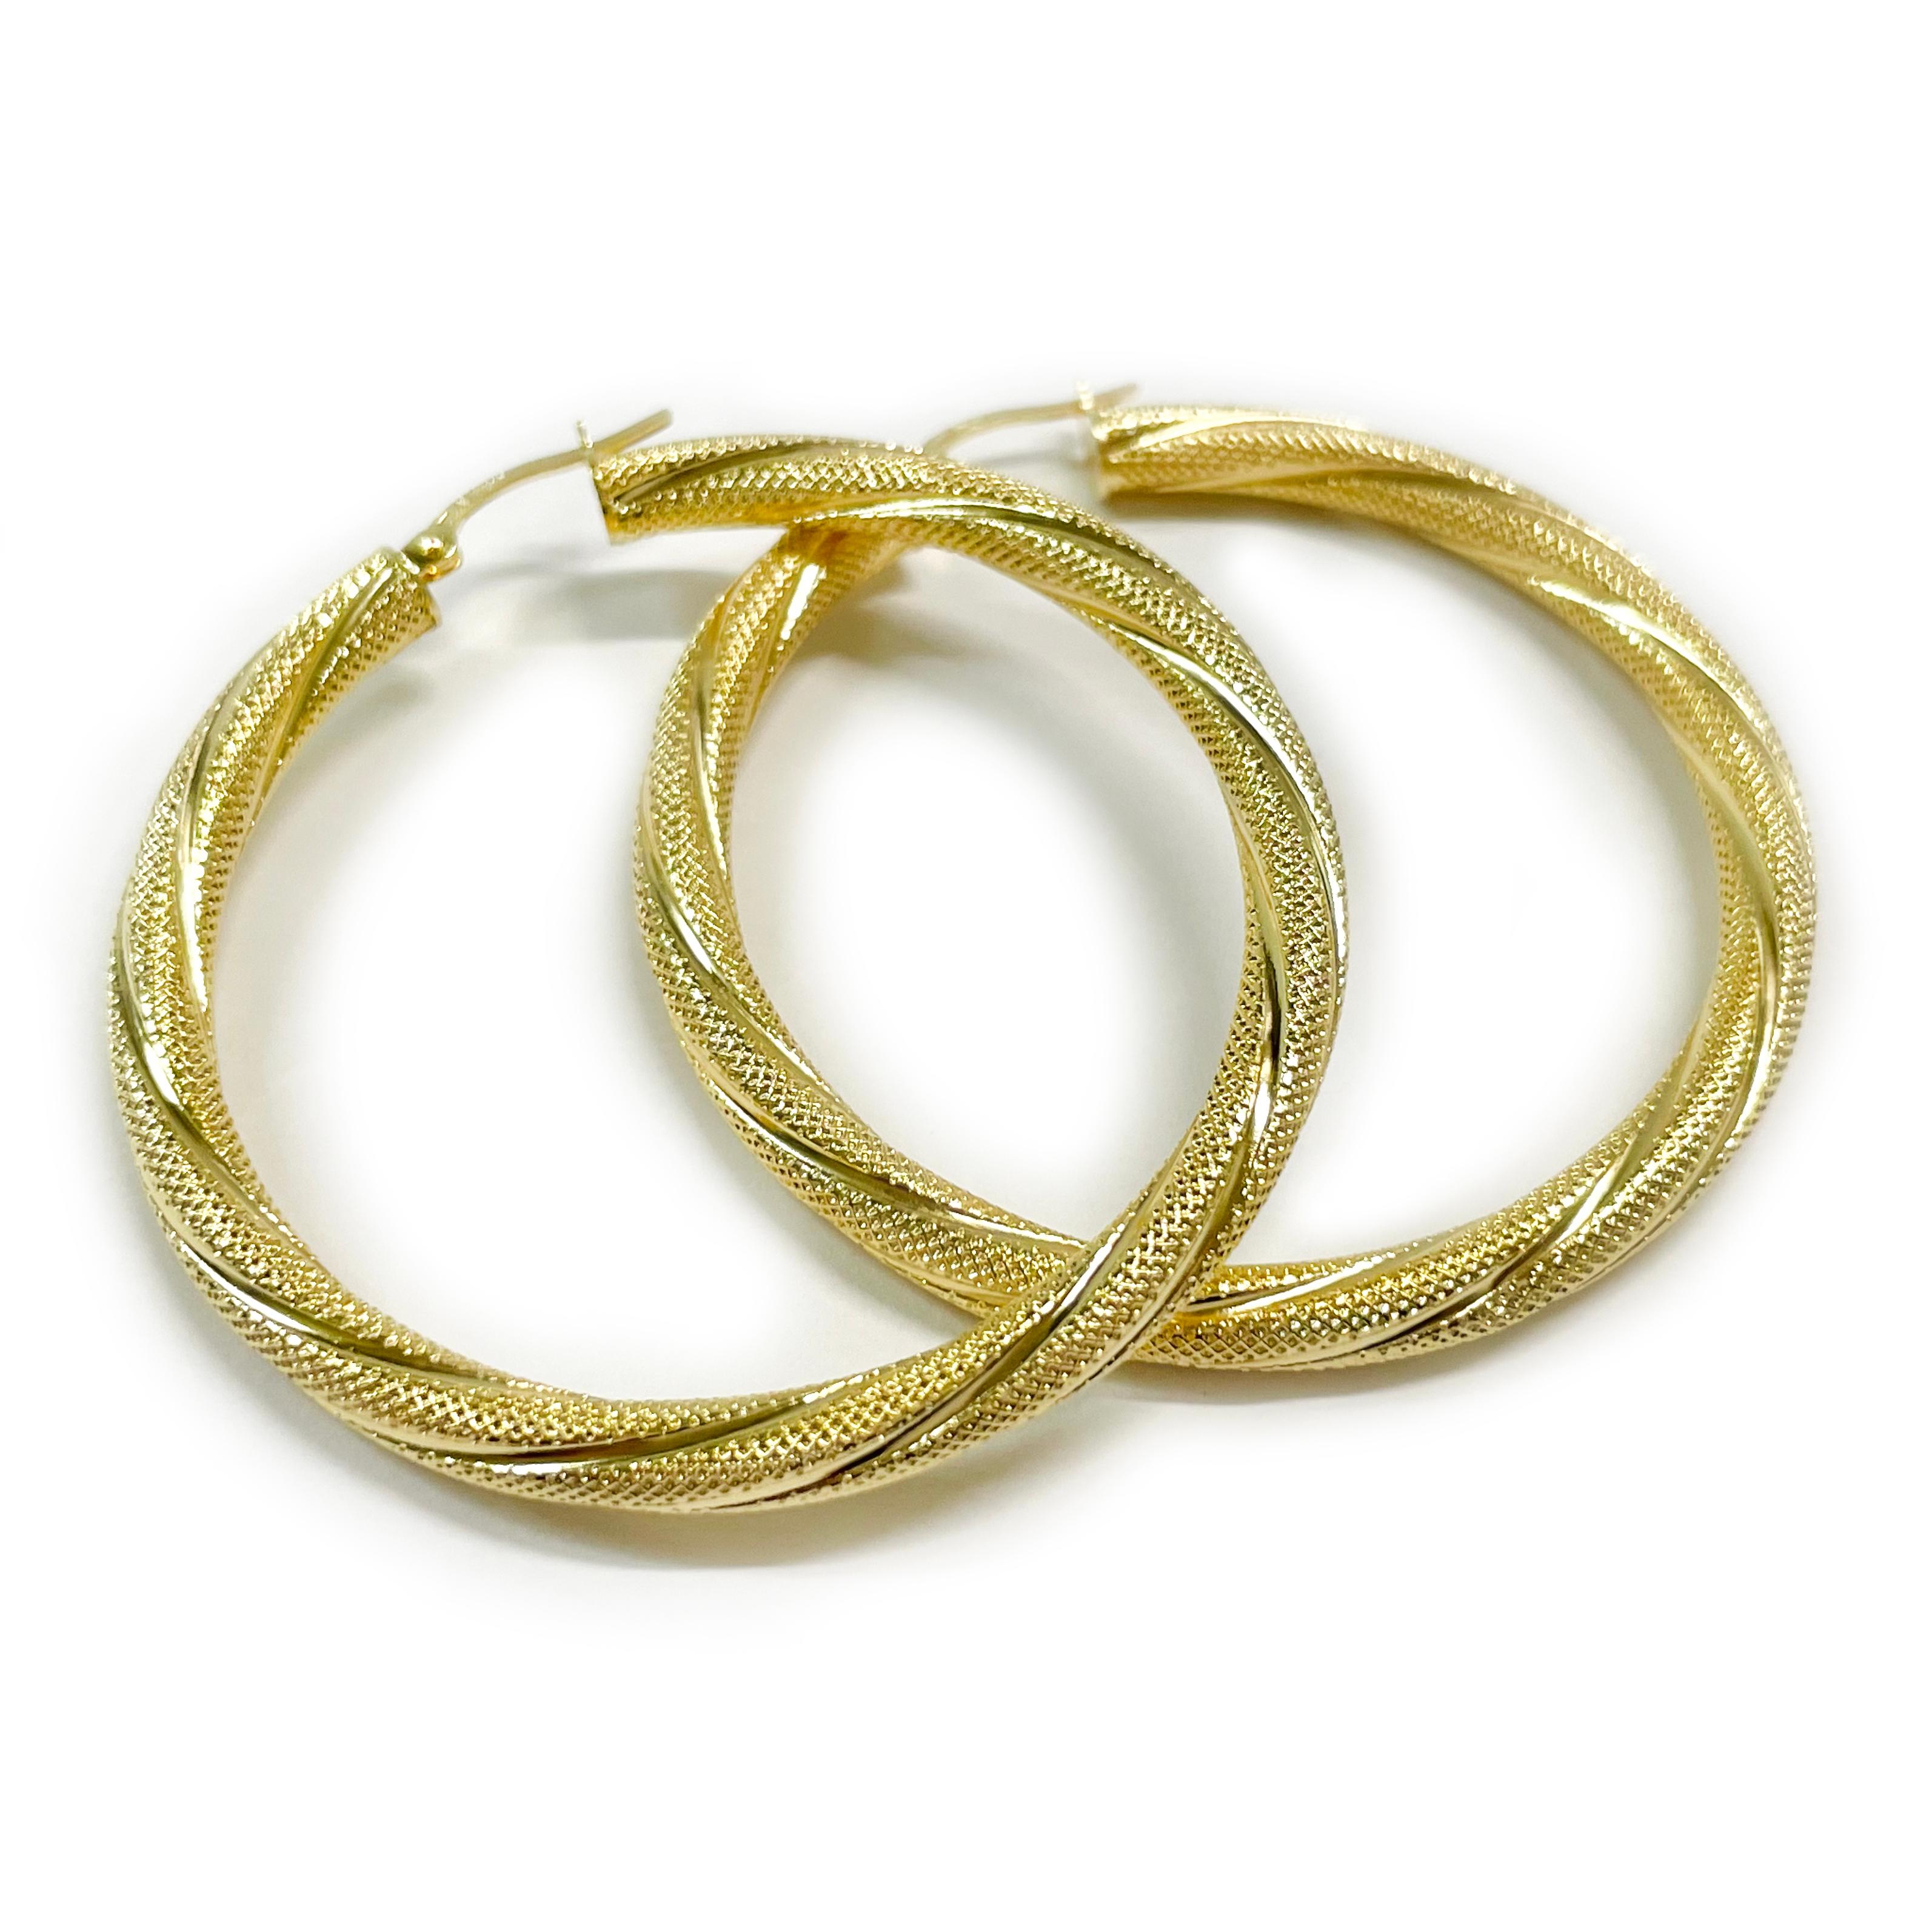 14 Karat Yellow Gold Textured Hoop Earrings. These classic lightweight hoops have a textured swirl pattern for added shimmer. The earrings have a joint and catch closure. Stamped on the joint of each earring is 14K ITALY. Each earrings measures